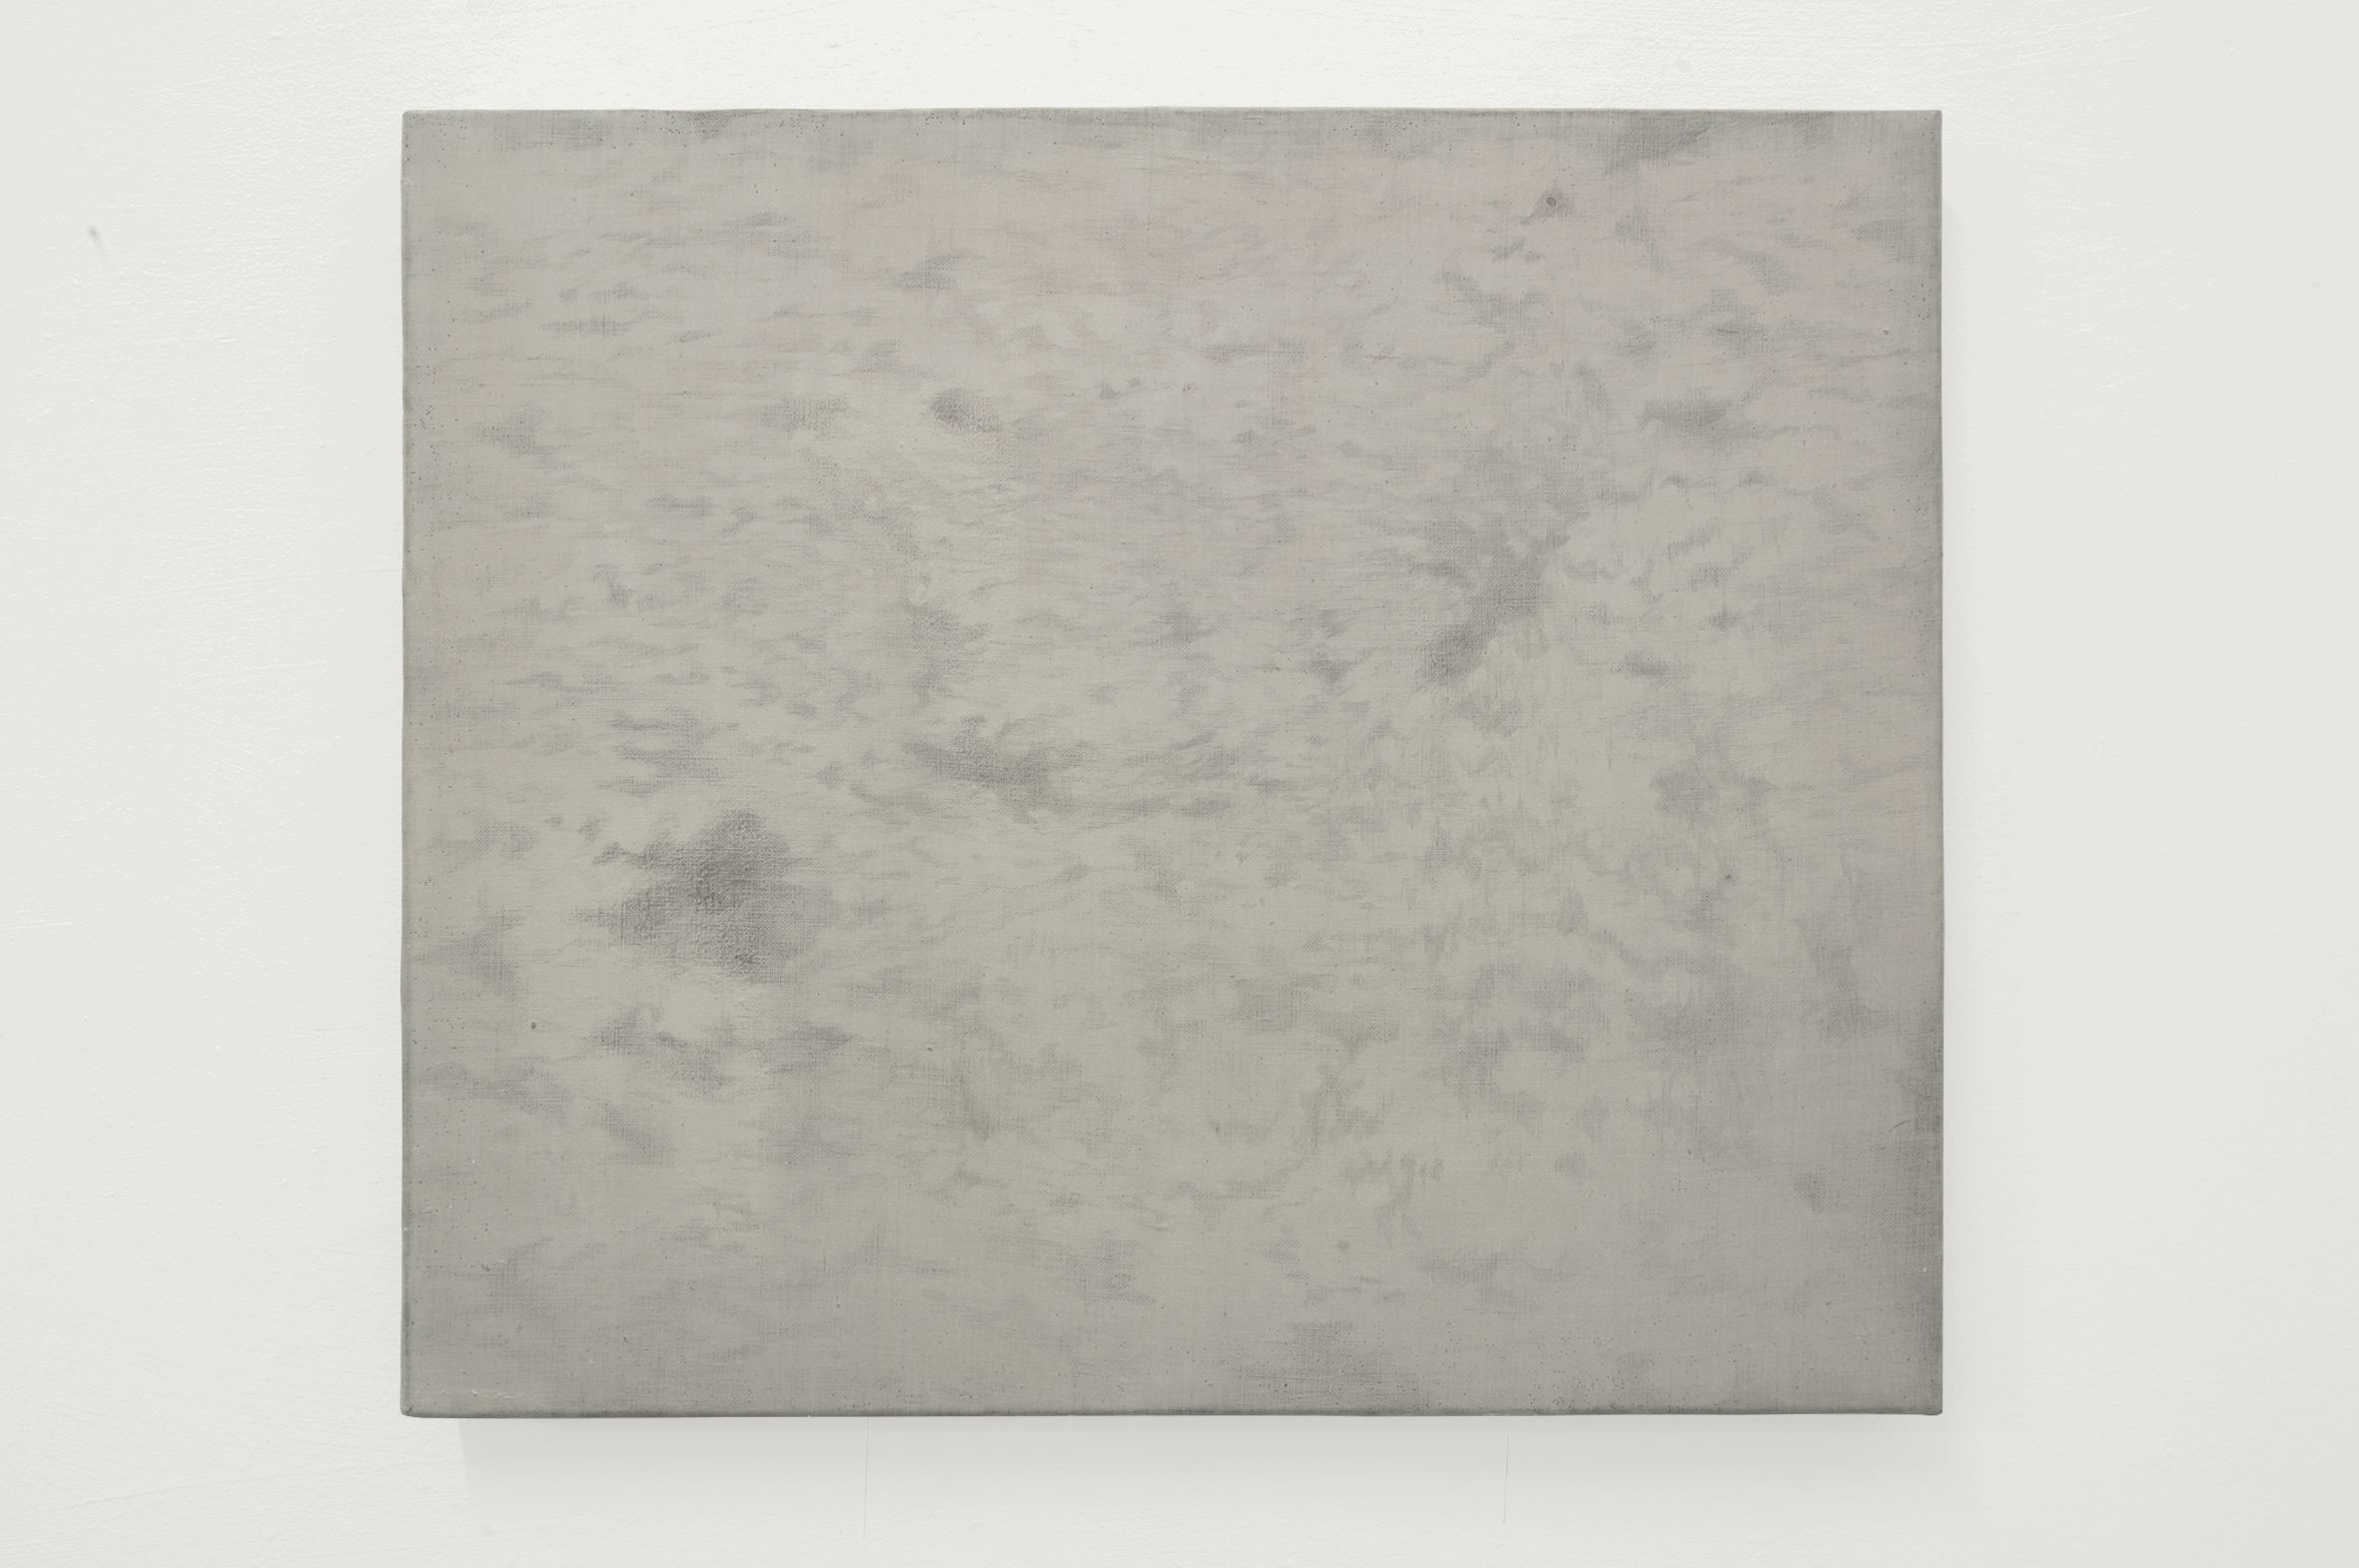 Giulio Saverio Rossi, Earthless map – the clouds (#1), 2018, silverpoint on bone white. Courtesy the artist